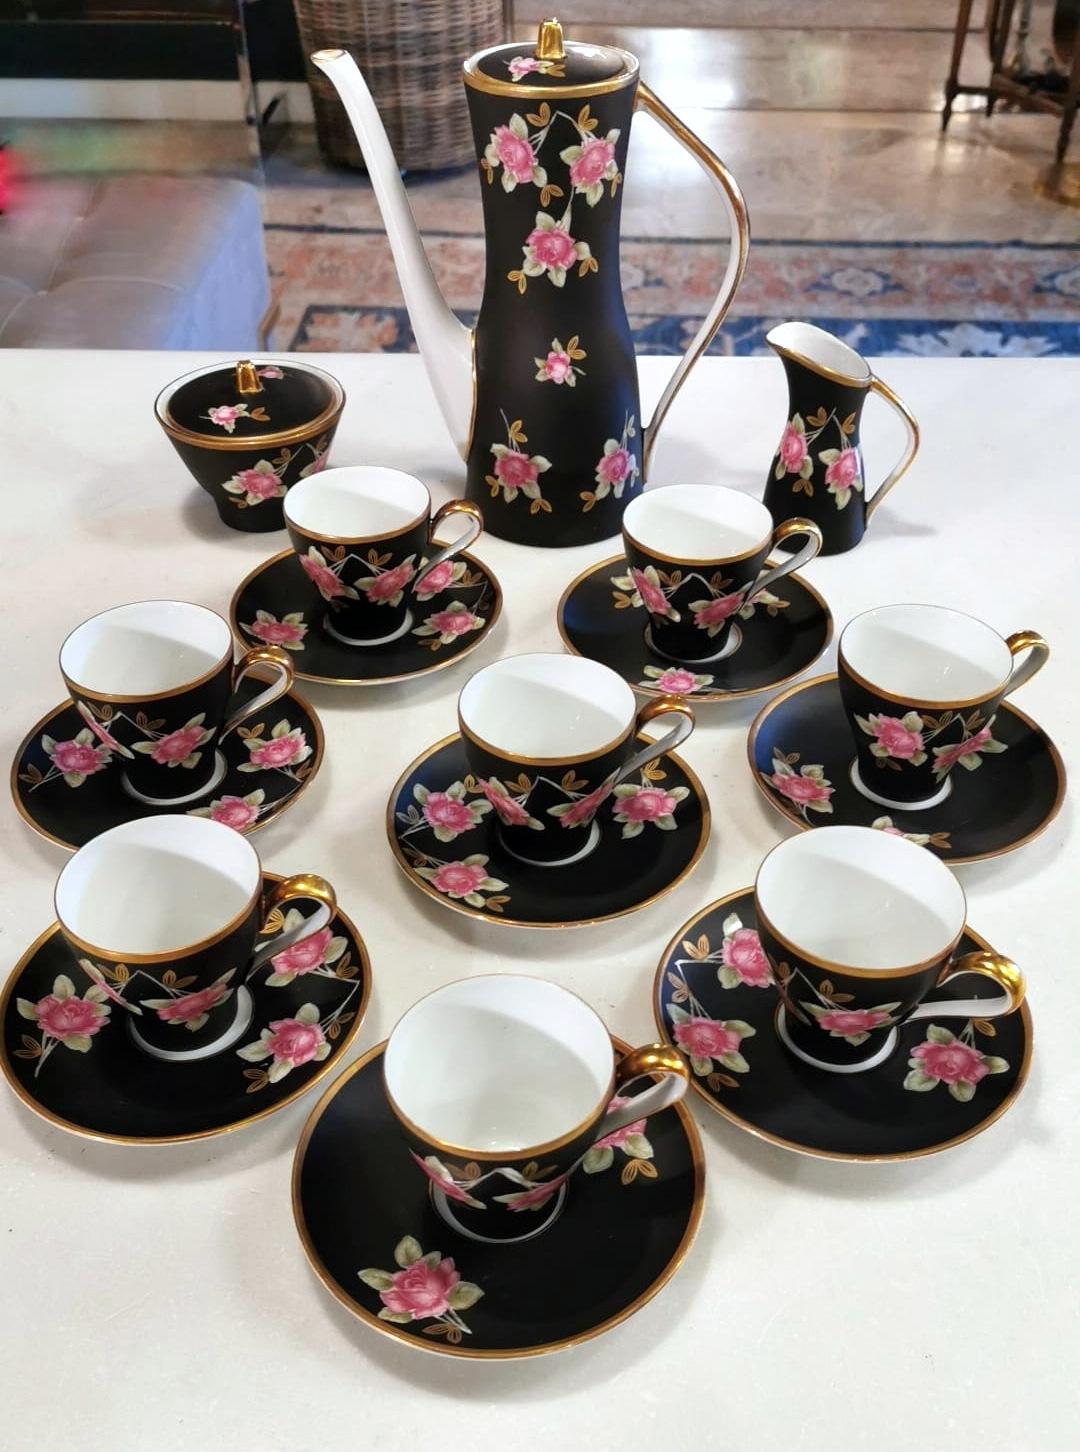 We kindly suggest you read the whole description, because with it we try to give you detailed technical and historical information to guarantee the authenticity of our objects.
Elegant and particular coffee service in fine French porcelain, consists